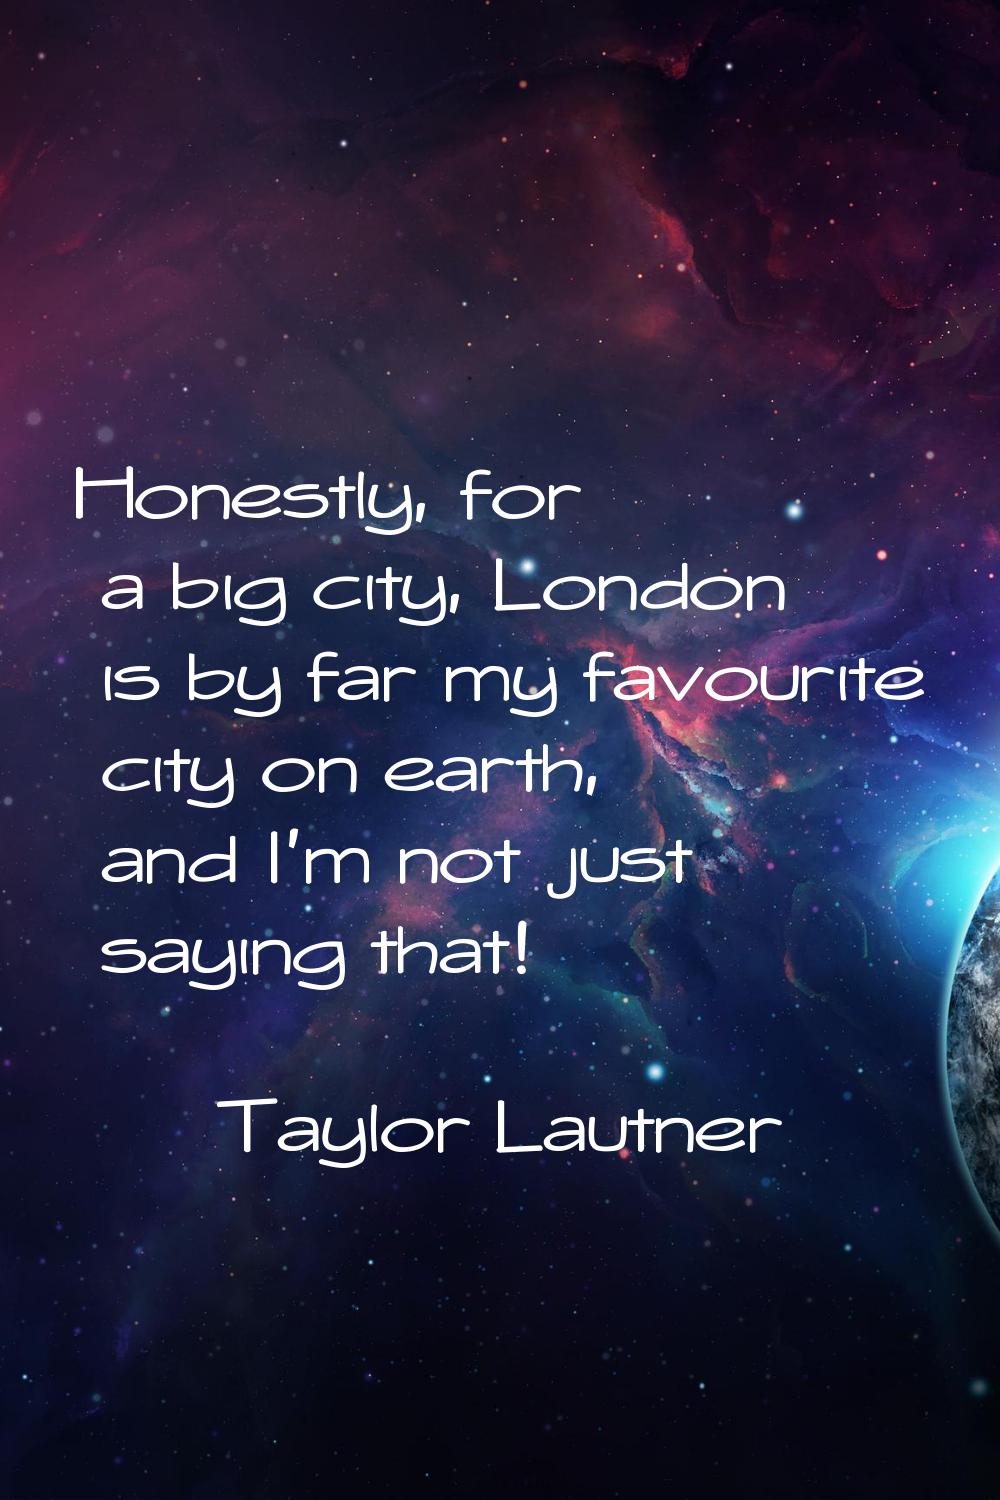 Honestly, for a big city, London is by far my favourite city on earth, and I'm not just saying that